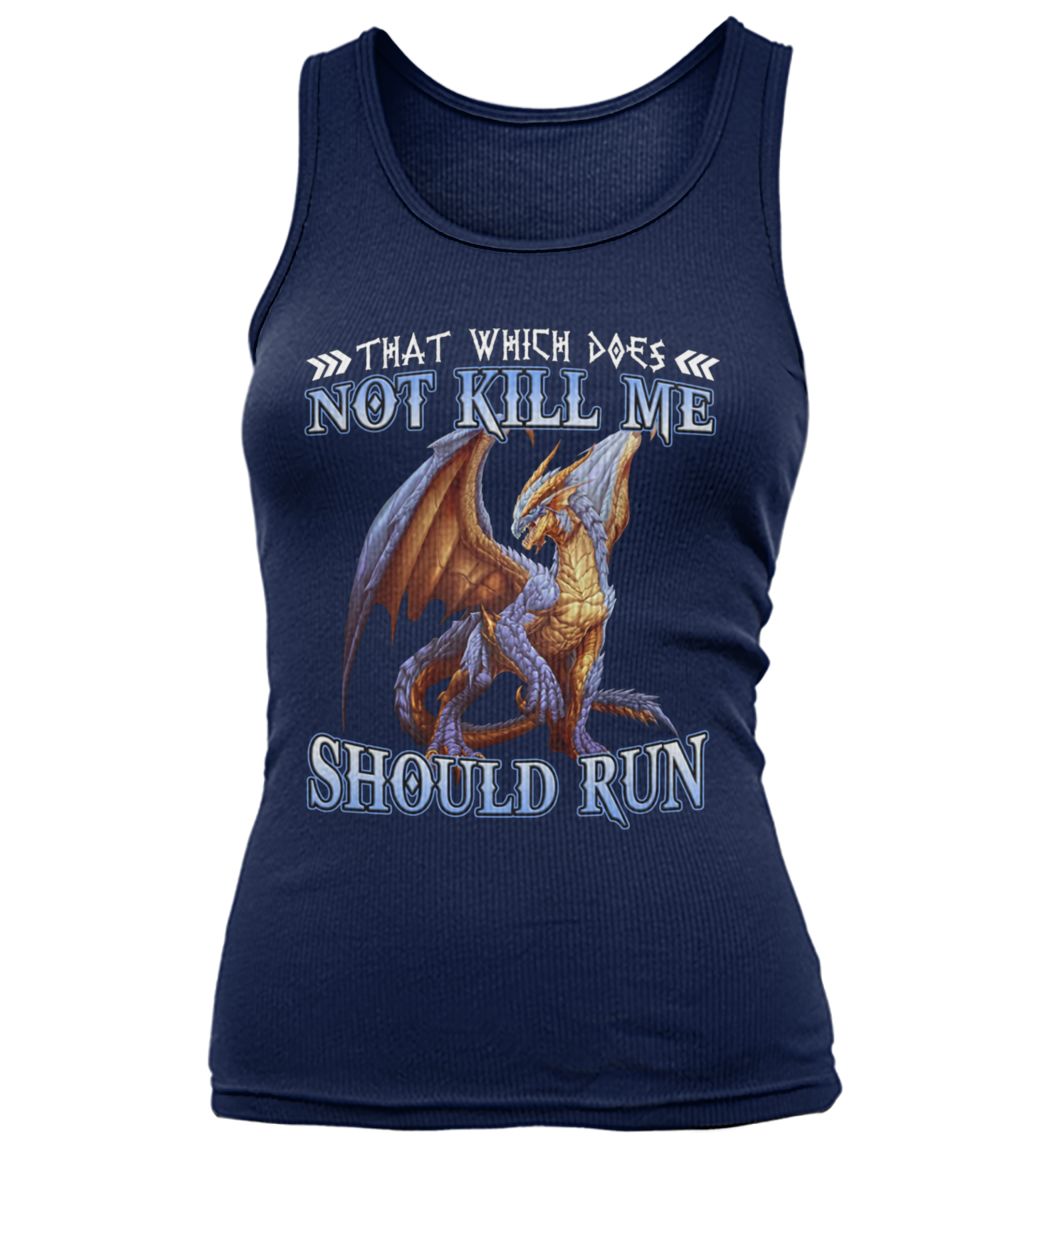 That which does not kill me should run dragon women's tank top